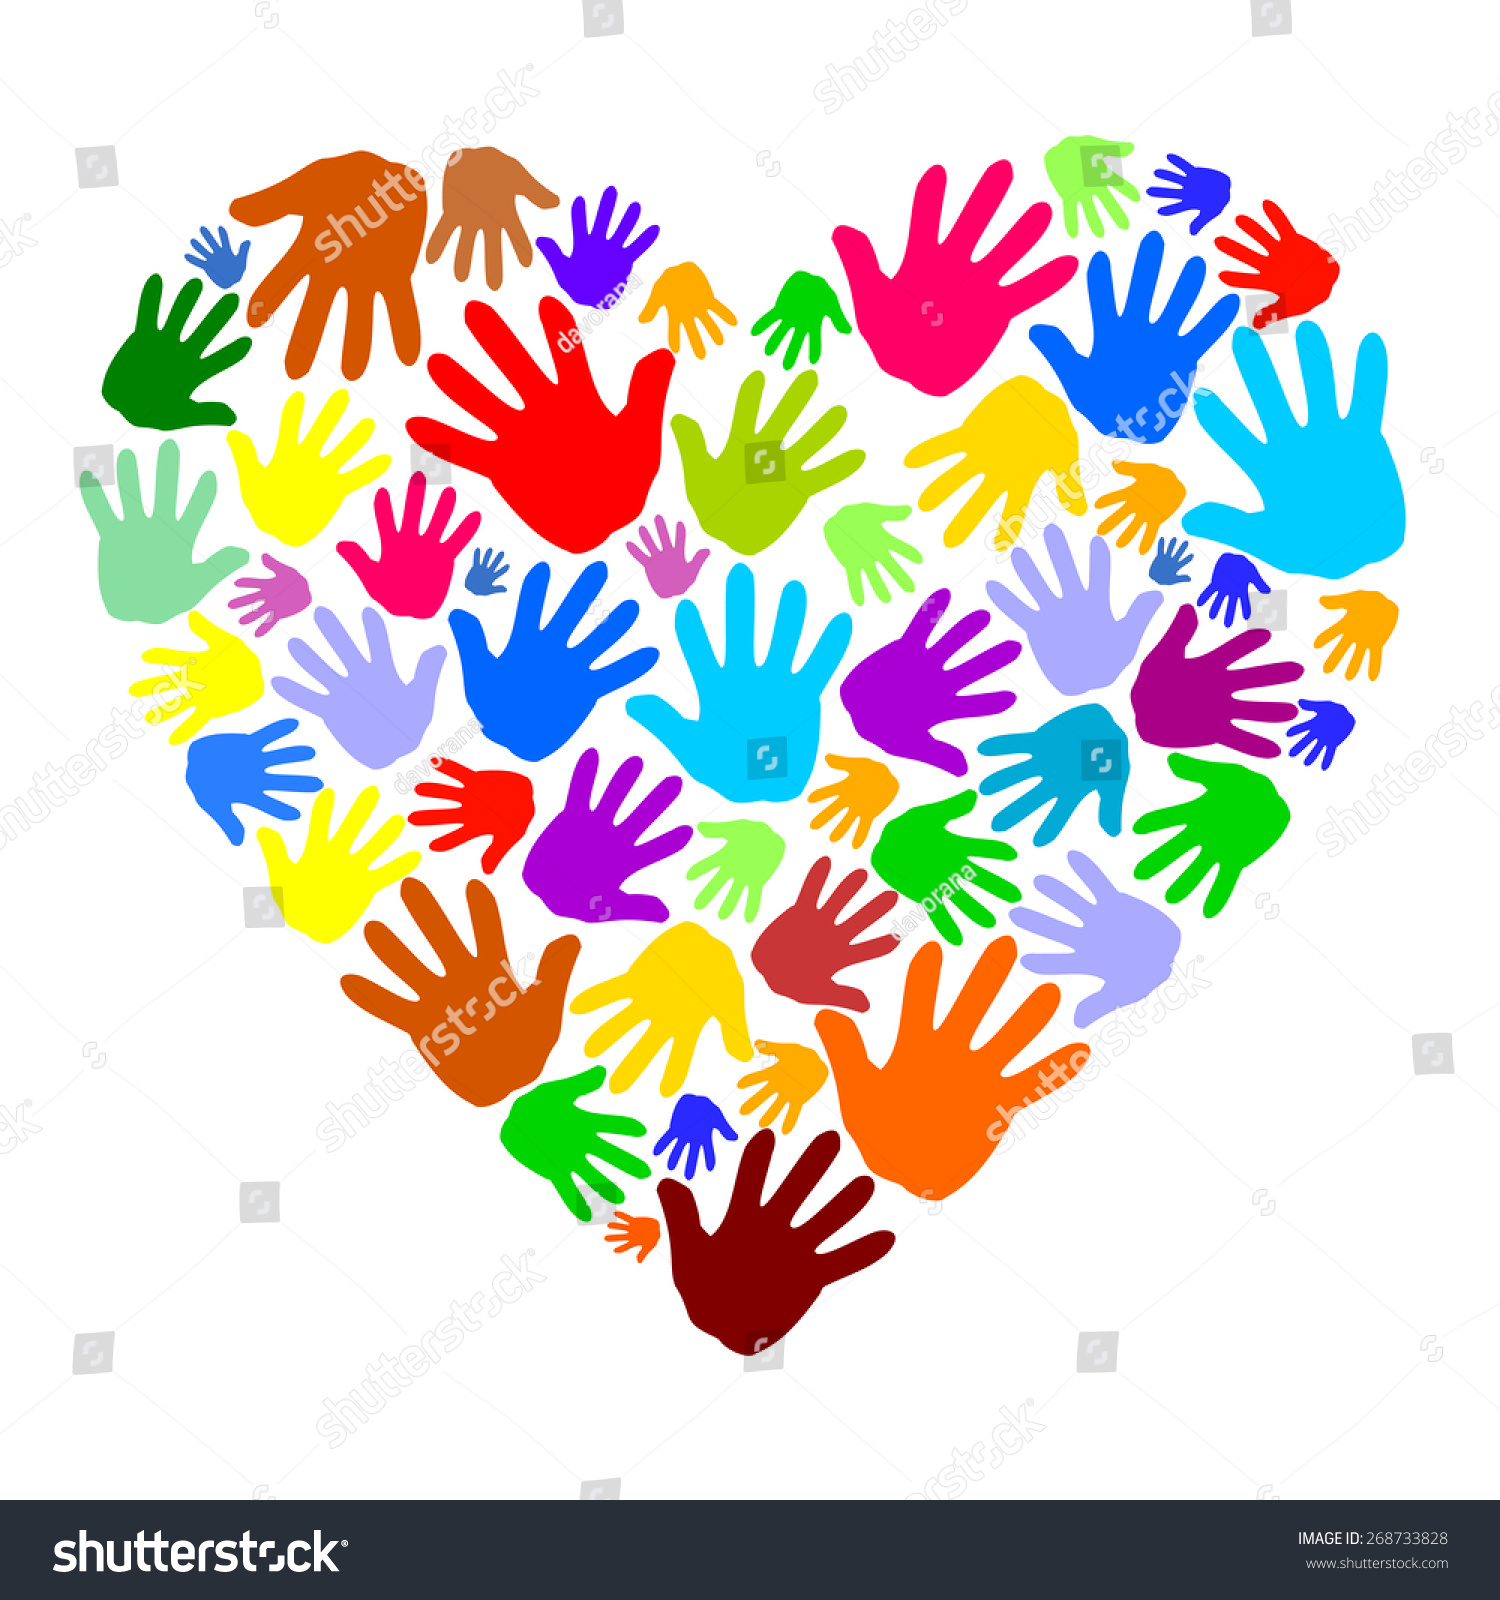 Abstract Colored Heart Shape Human Hand Stock Vector (Royalty Free ...